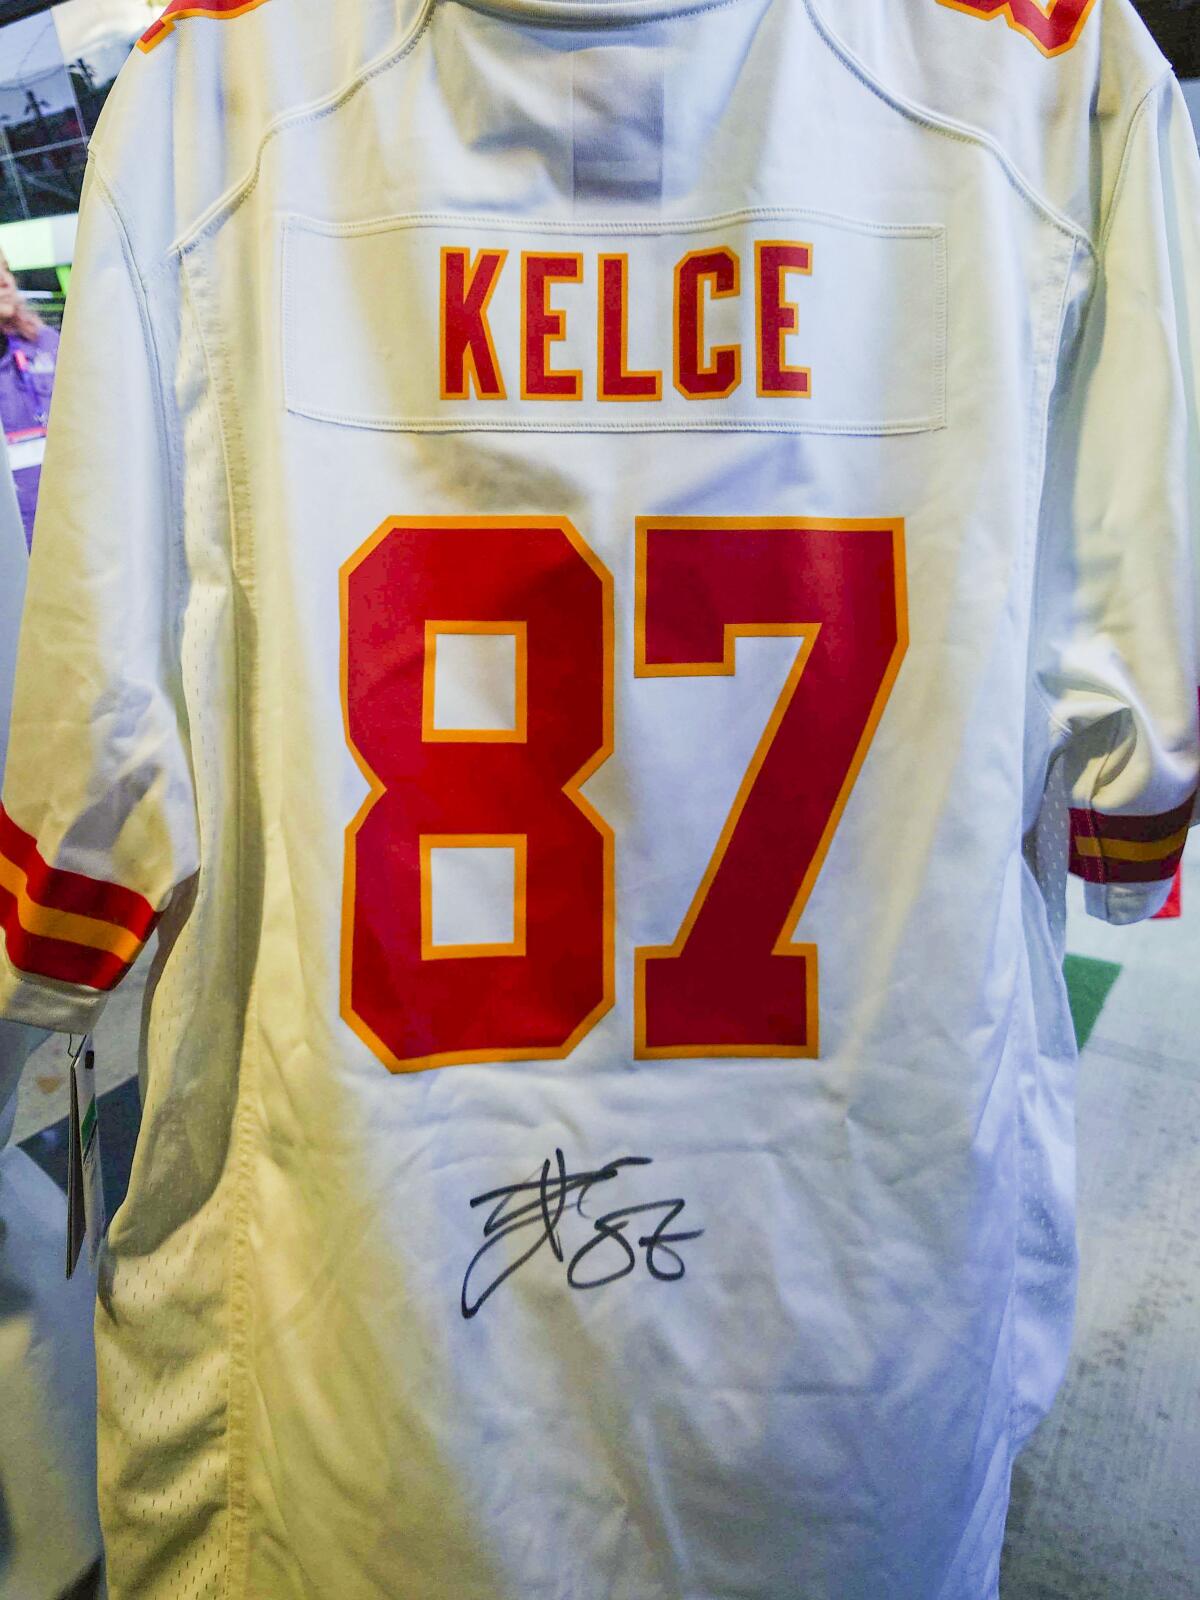 An autographed Kelce jersey.